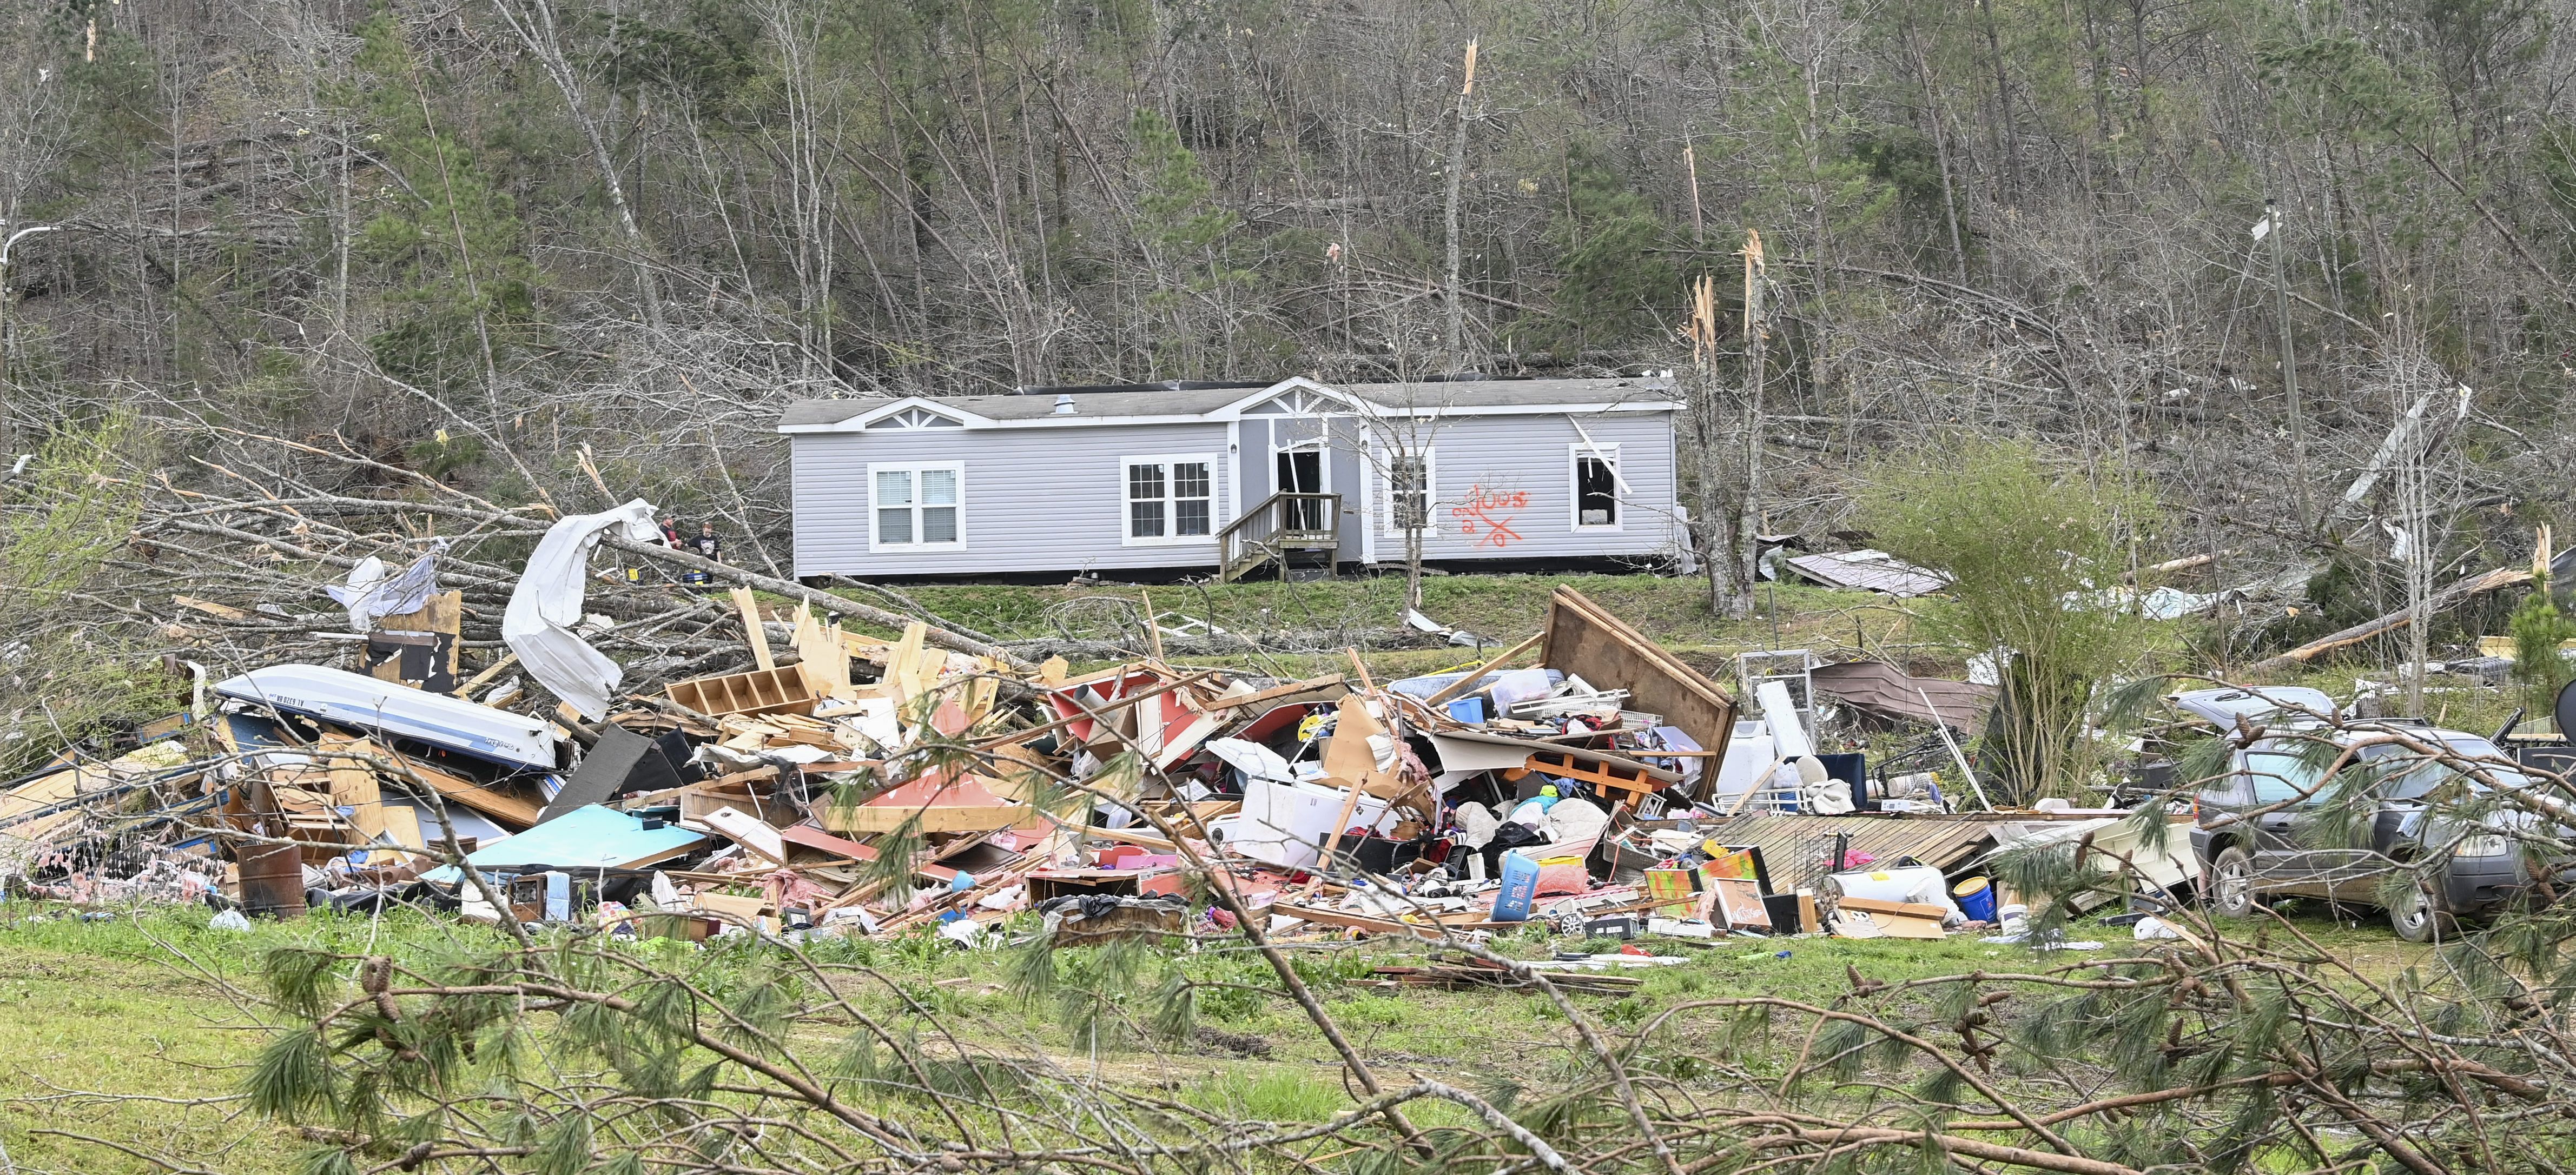 Photo of a home completely destroyed